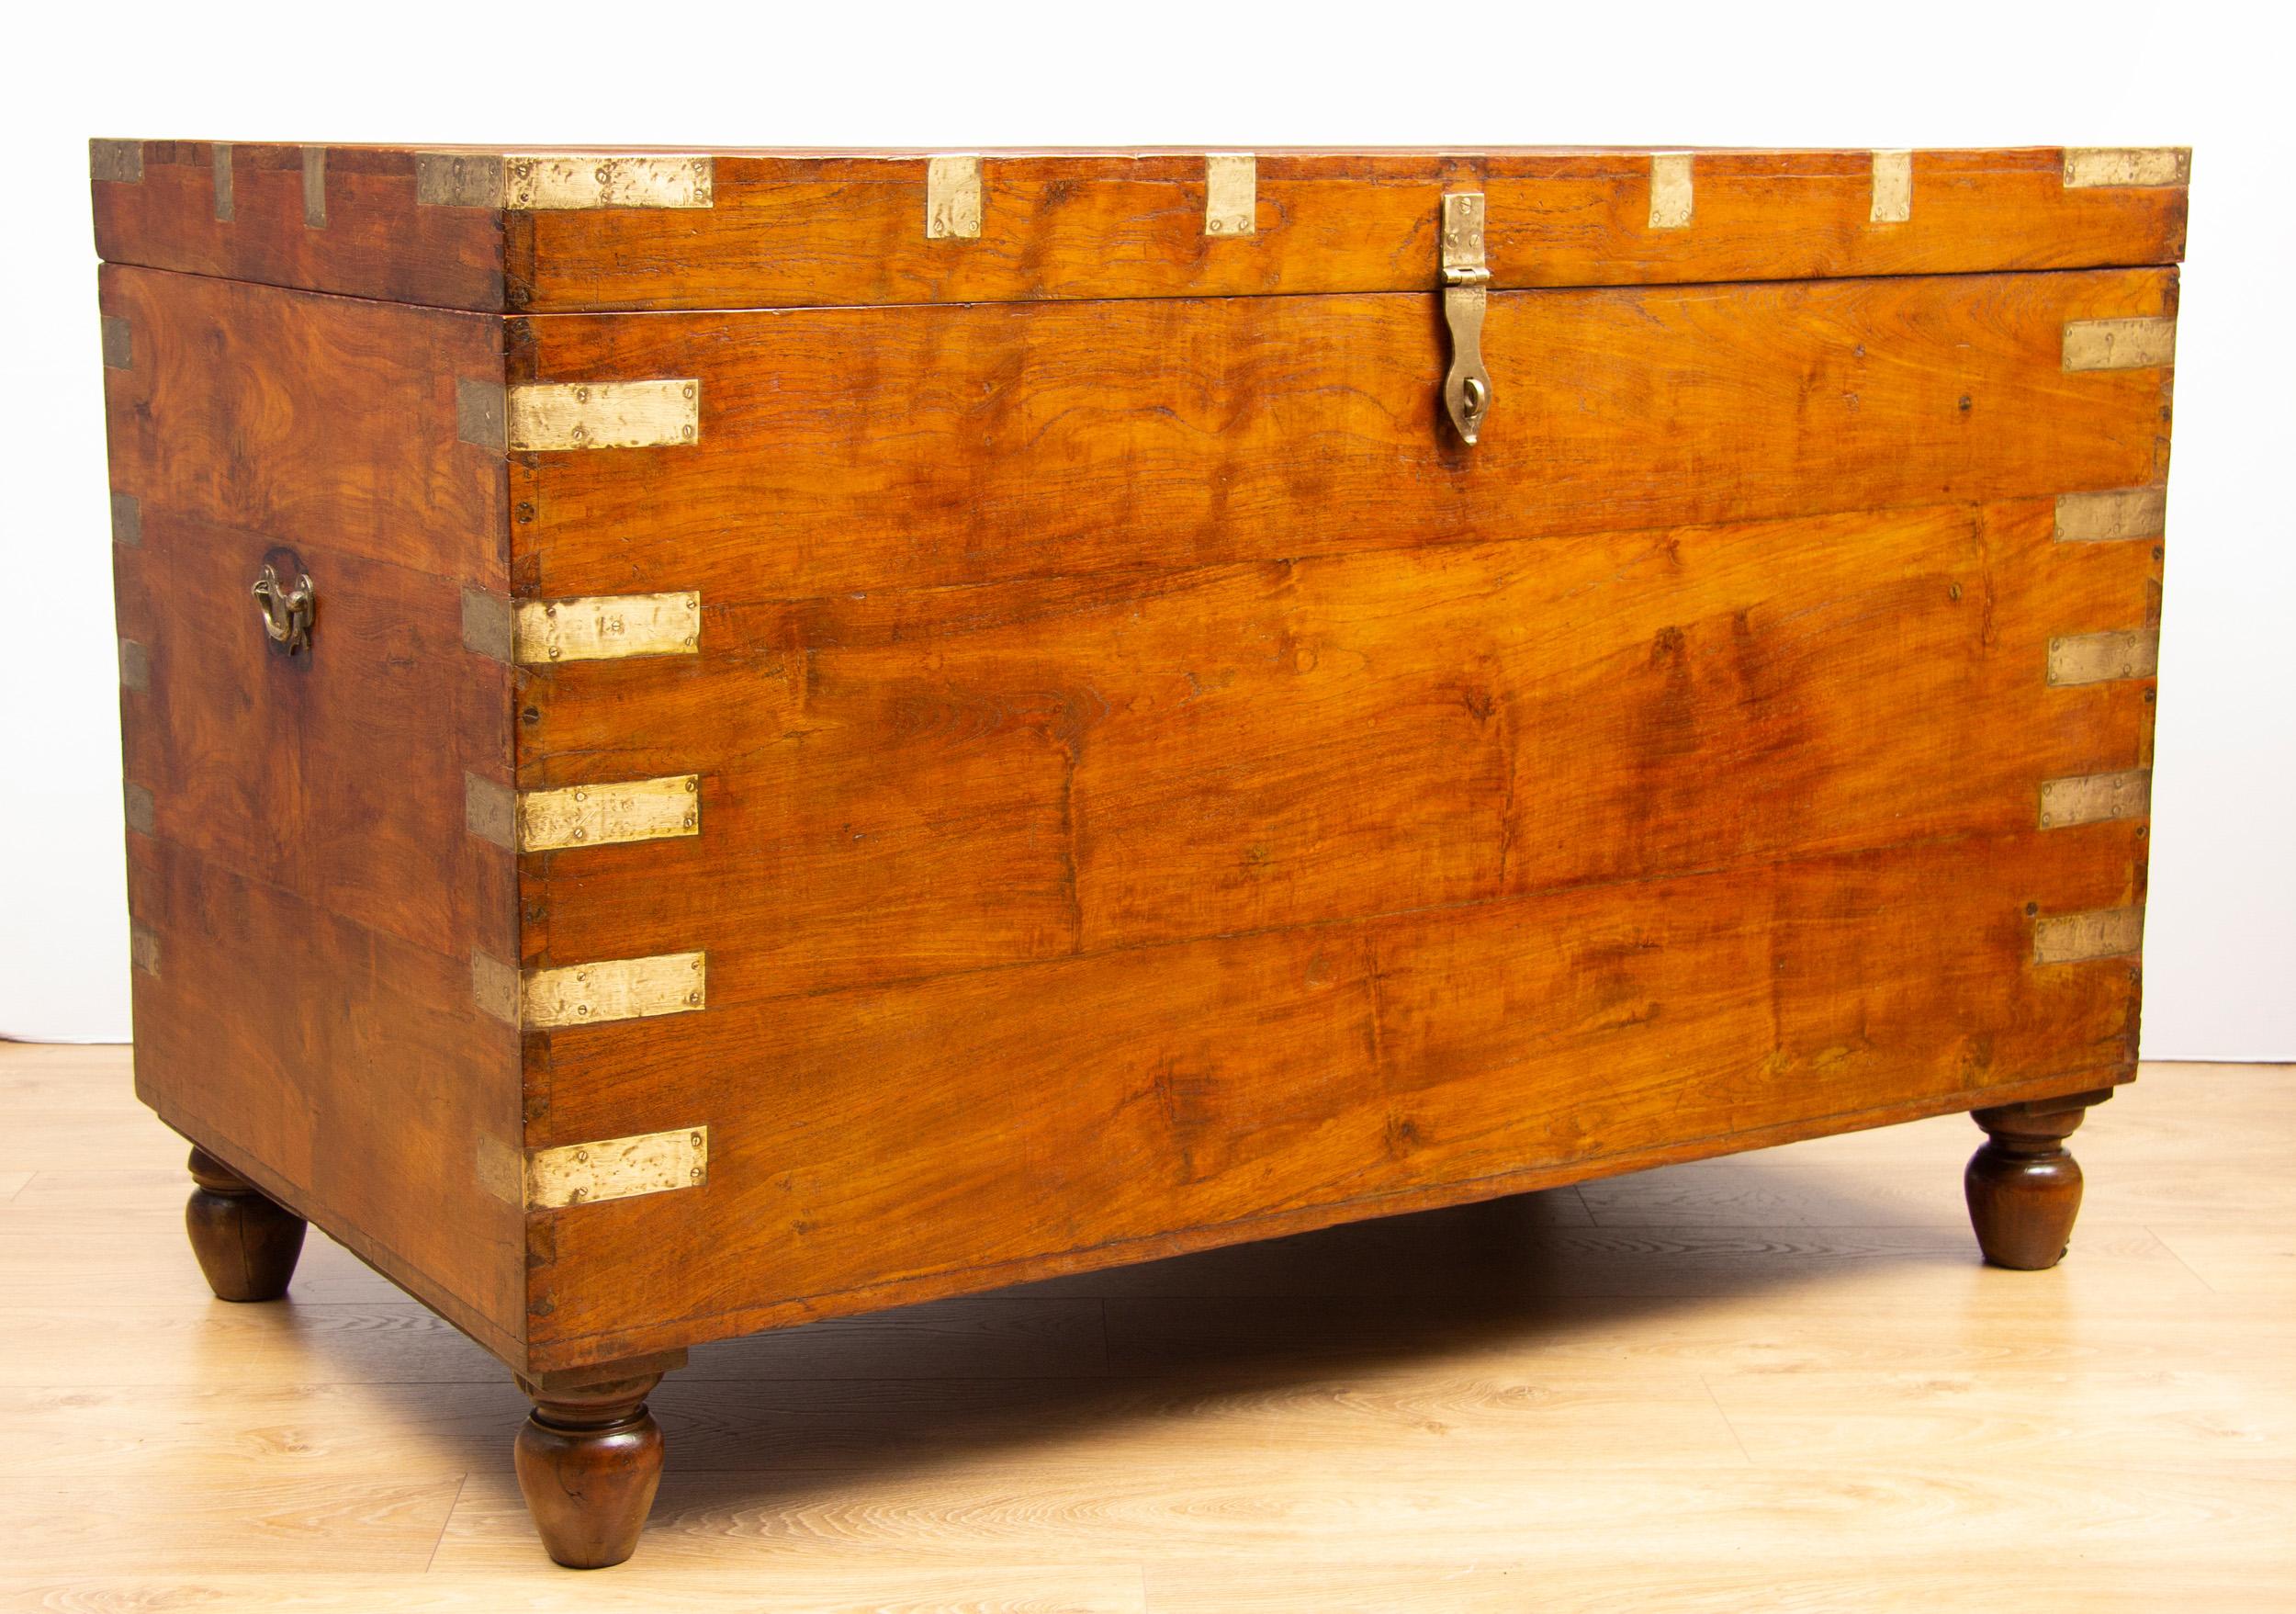 Large 19th century Indian teak chest.
The biggest we have ever seen! 

This massive brass bound trunk sits on four turned legs
The ultimate antique storage option, this could fit enough blankets and sheets for a small hotel.